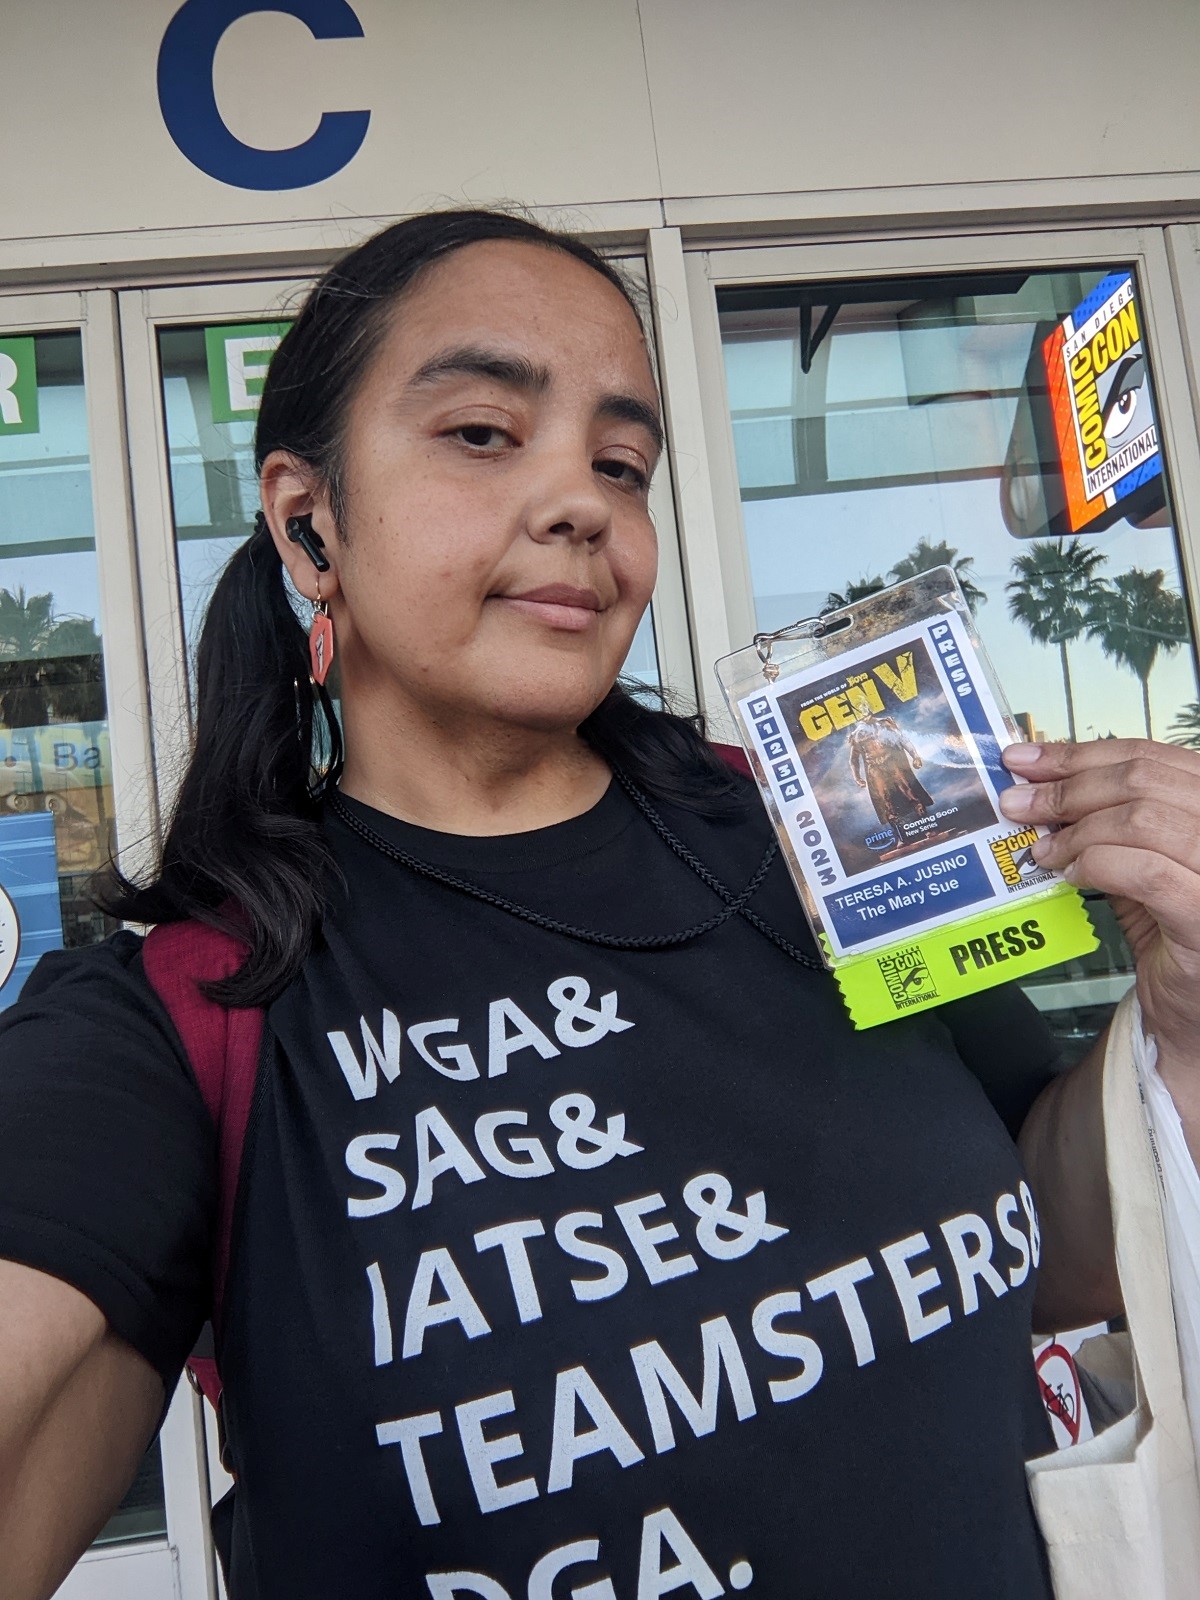 Image of Teresa Jusino (brown Latina with long, dark hair in pigtails) wearing red dangly earrings and a t-shirt that reads "WGA & SAG & IATSE & TEAMSTERS & DGA." She is holding up her Comic-Con badge which has her name and outlet on it, and a "Press" sticker attached to the bottom. 